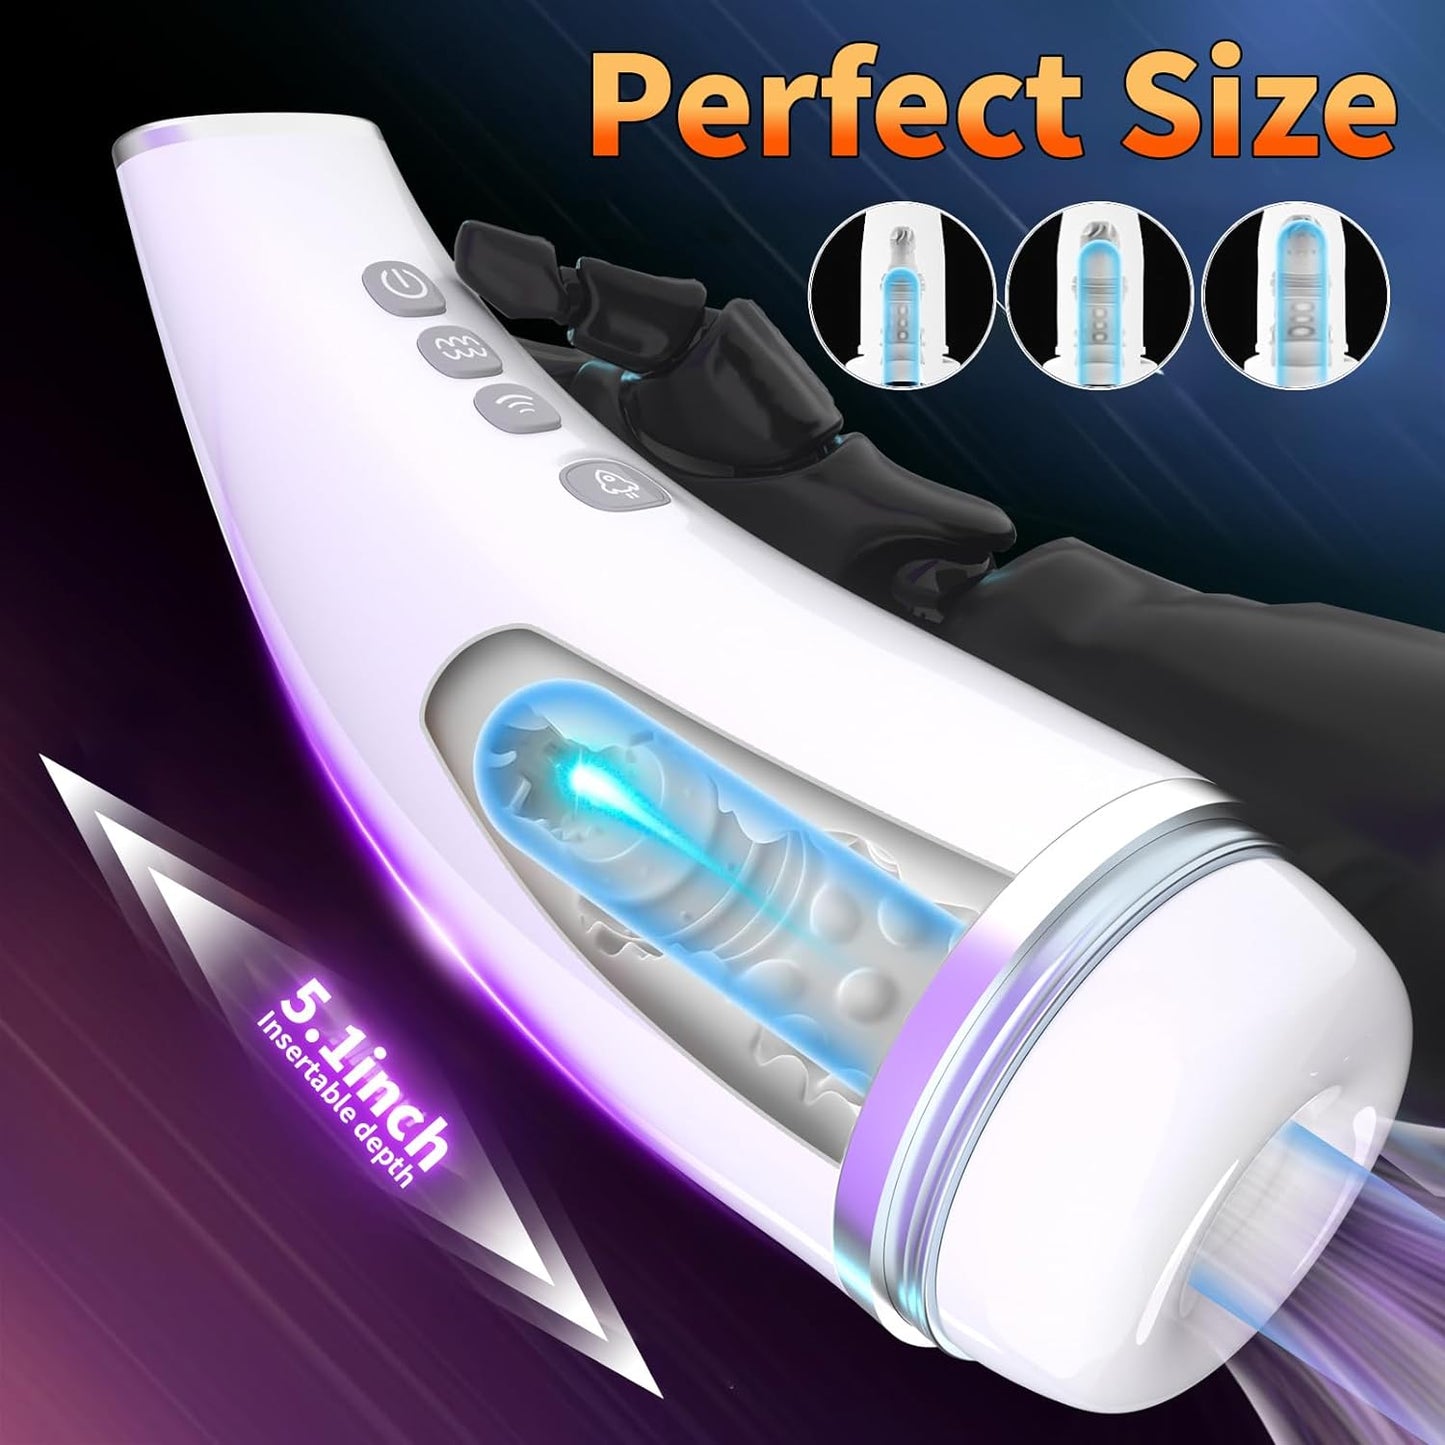 Smart LCD display masturbation cup with 7 suction modes and 10 vibration modes 